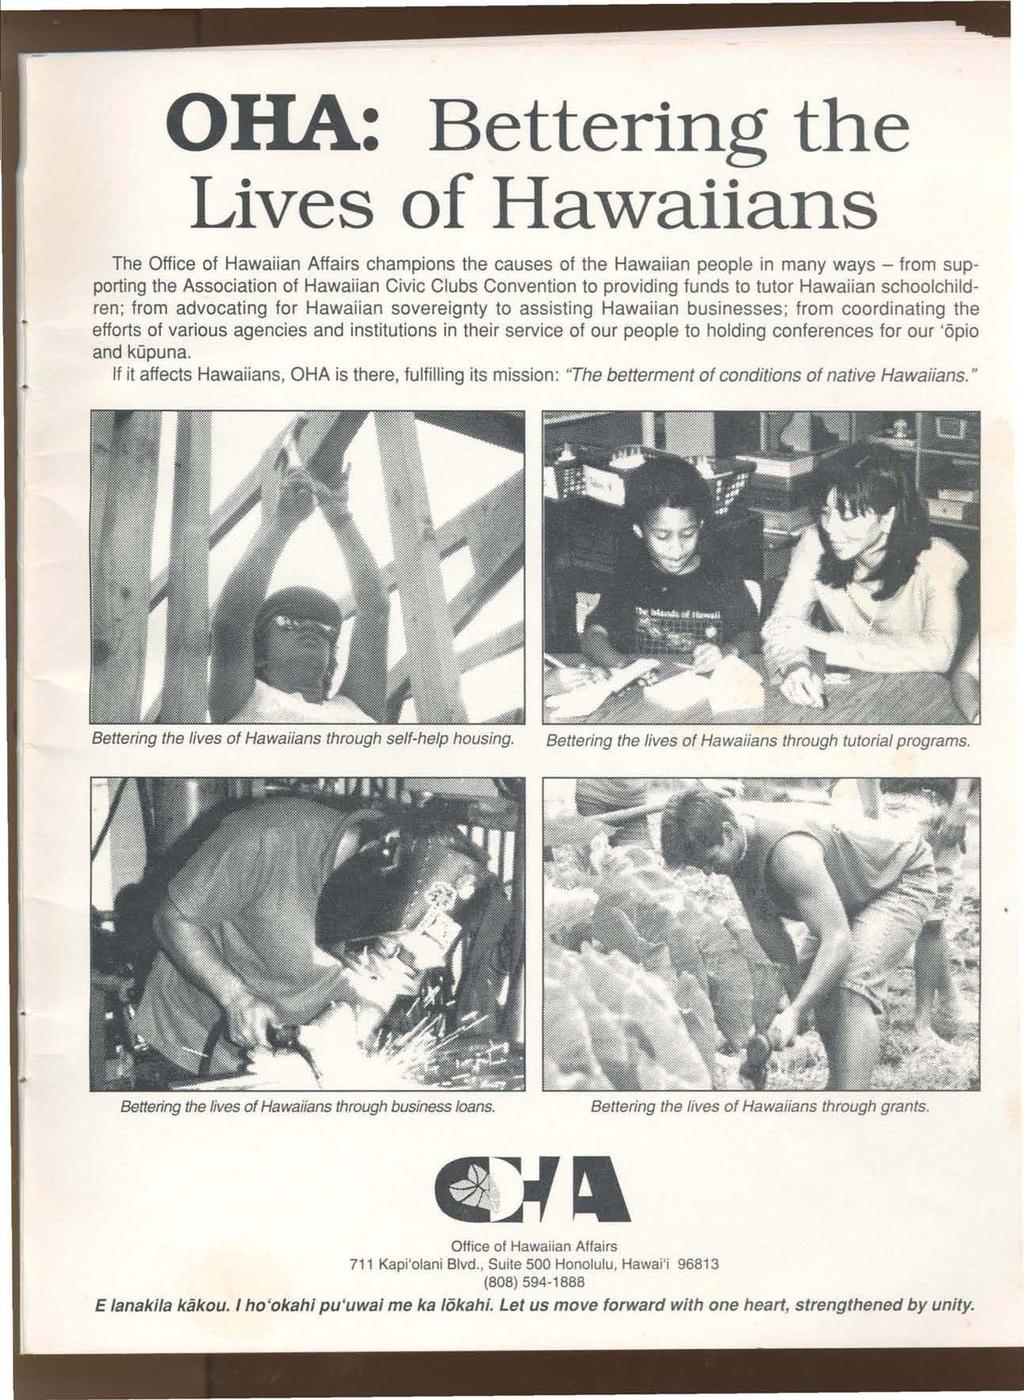 OHA: Bettering the Lives of Hawaiians The Office of Hawaiian Affairs champions the causes of the Hawaiian people in many ways - from supporting the Association of Hawaiian Civic Clubs Convention to